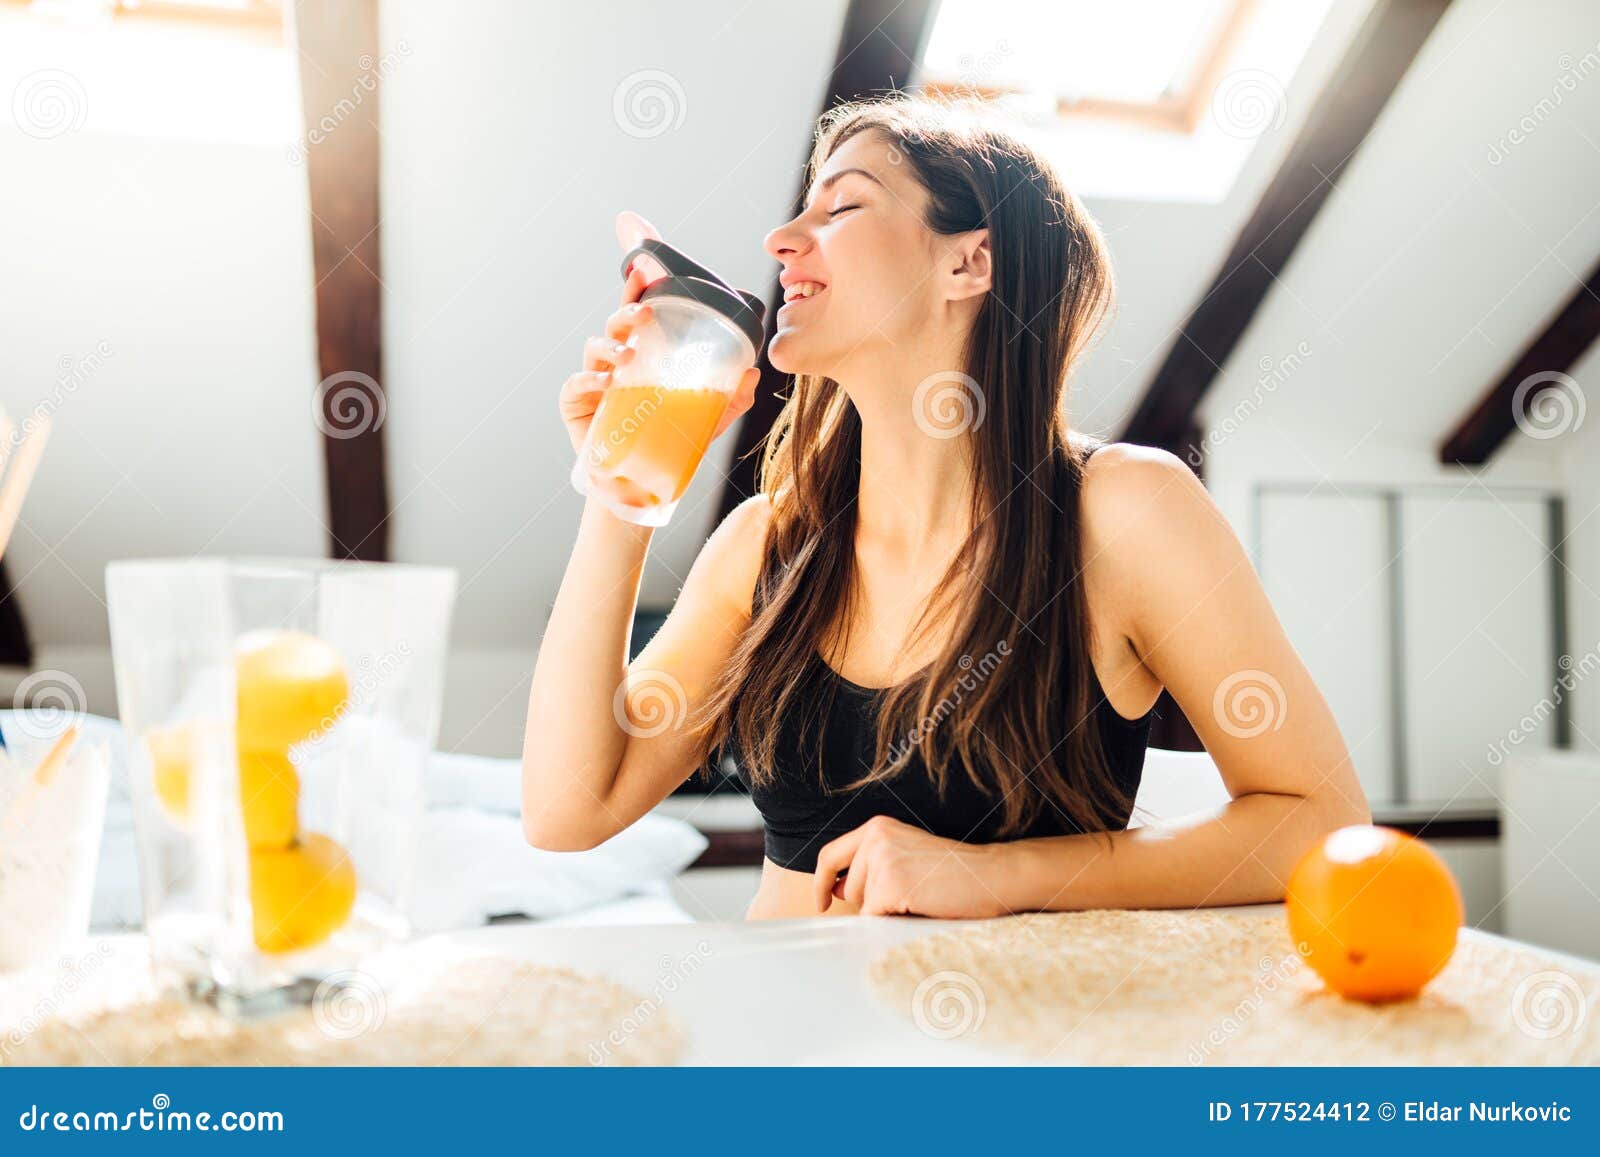 woman at home drinking orange flavored amino acid vitamin powder.keto supplement.after exercise liquid meal.weight loss